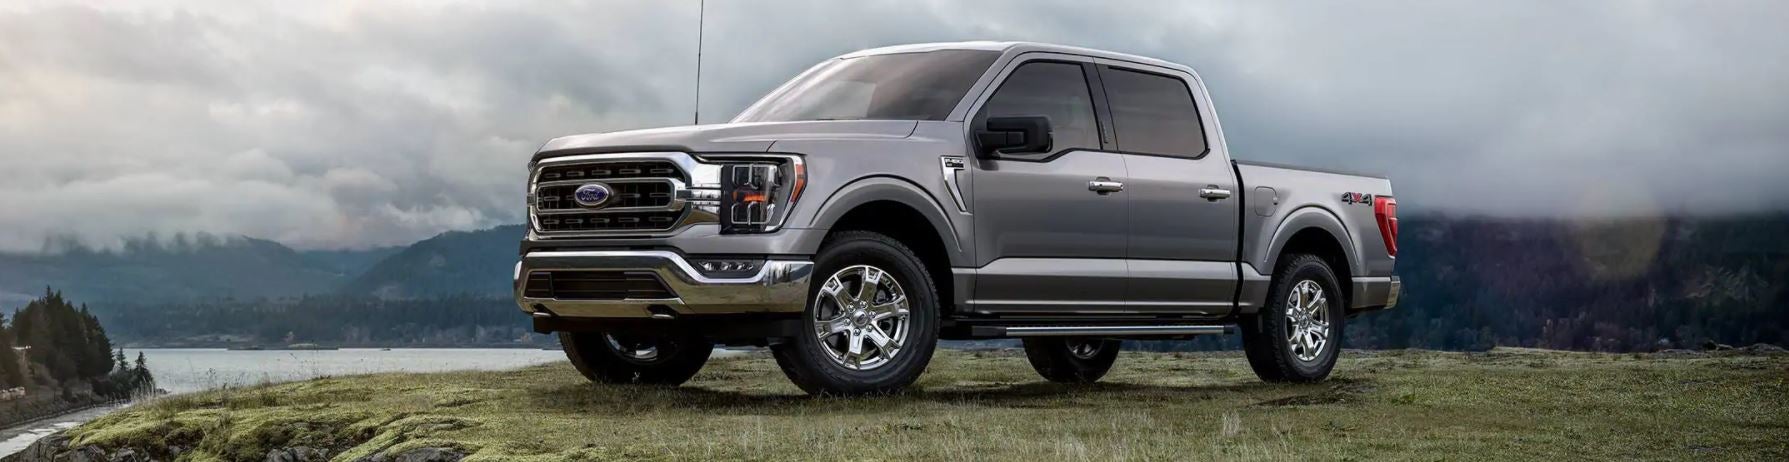 2021 Ford F-150 Model Review